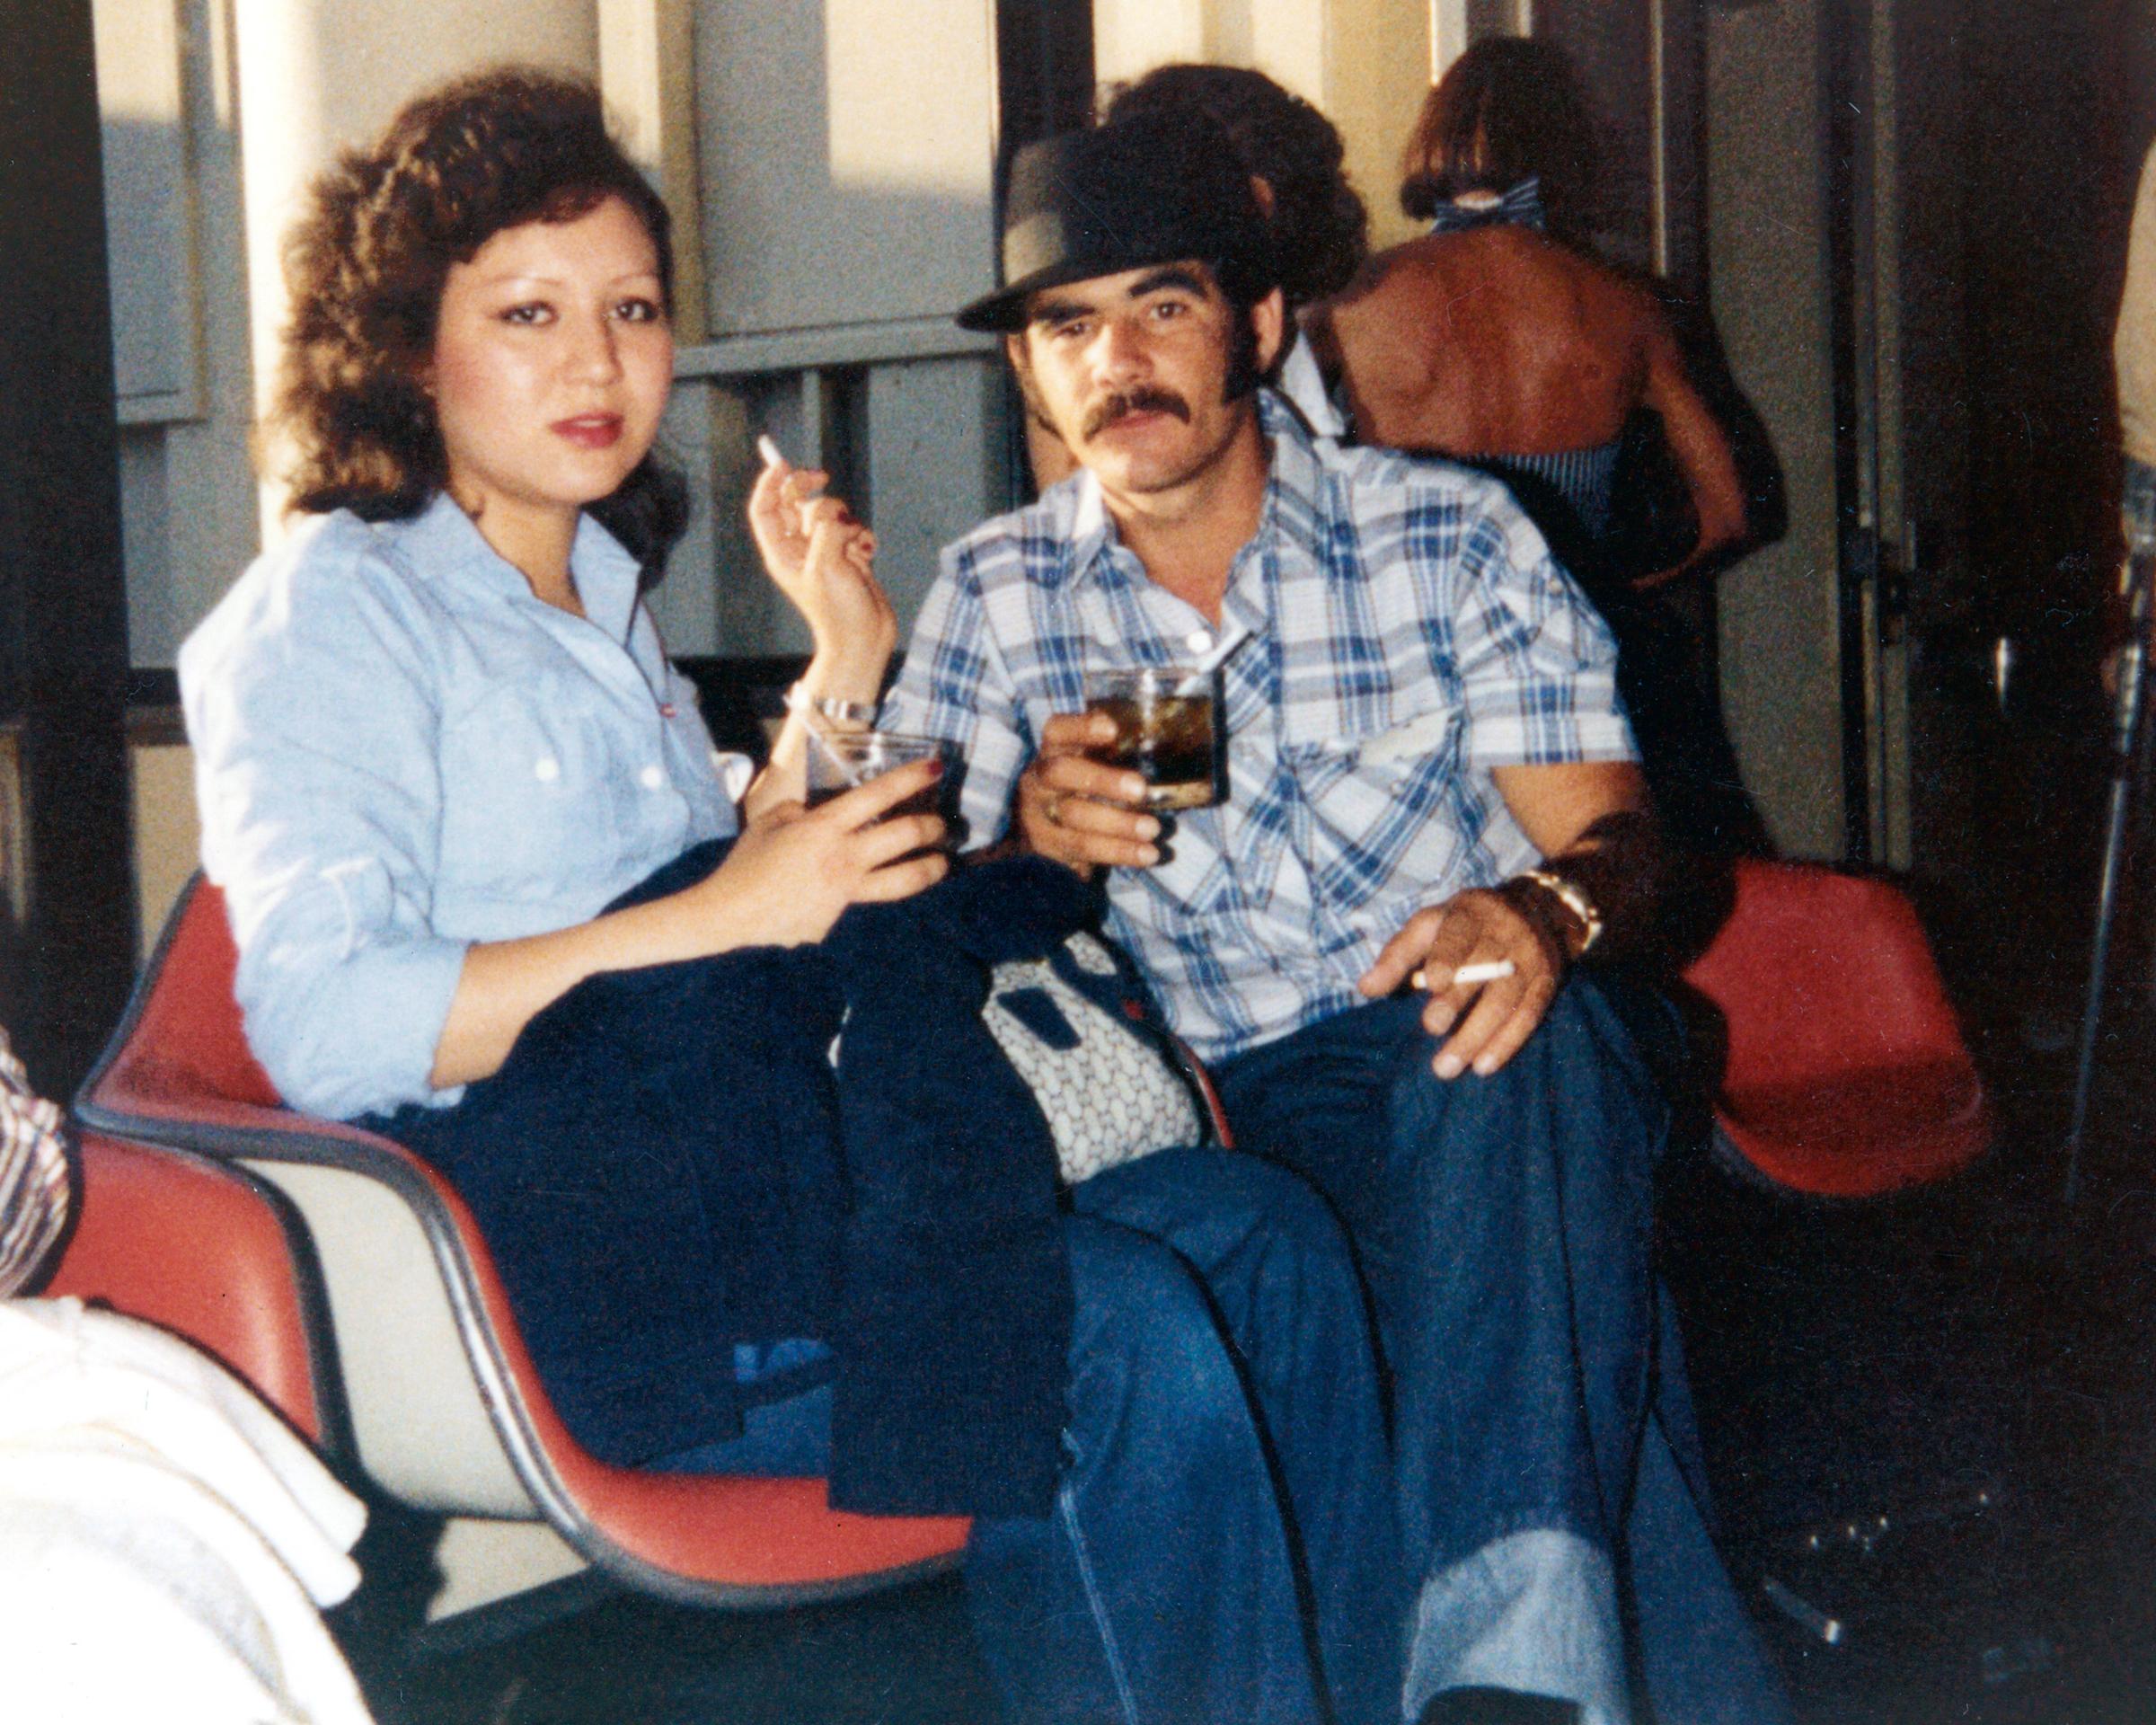 Silvio with a girlfriend in California. Silvio grew depressed and turned to drinking in the U.S. after leaving behind his wife and two daughters in Cuba. He says that Sira and Manuel Gonzalez and their children saved his life by welcoming him in California.